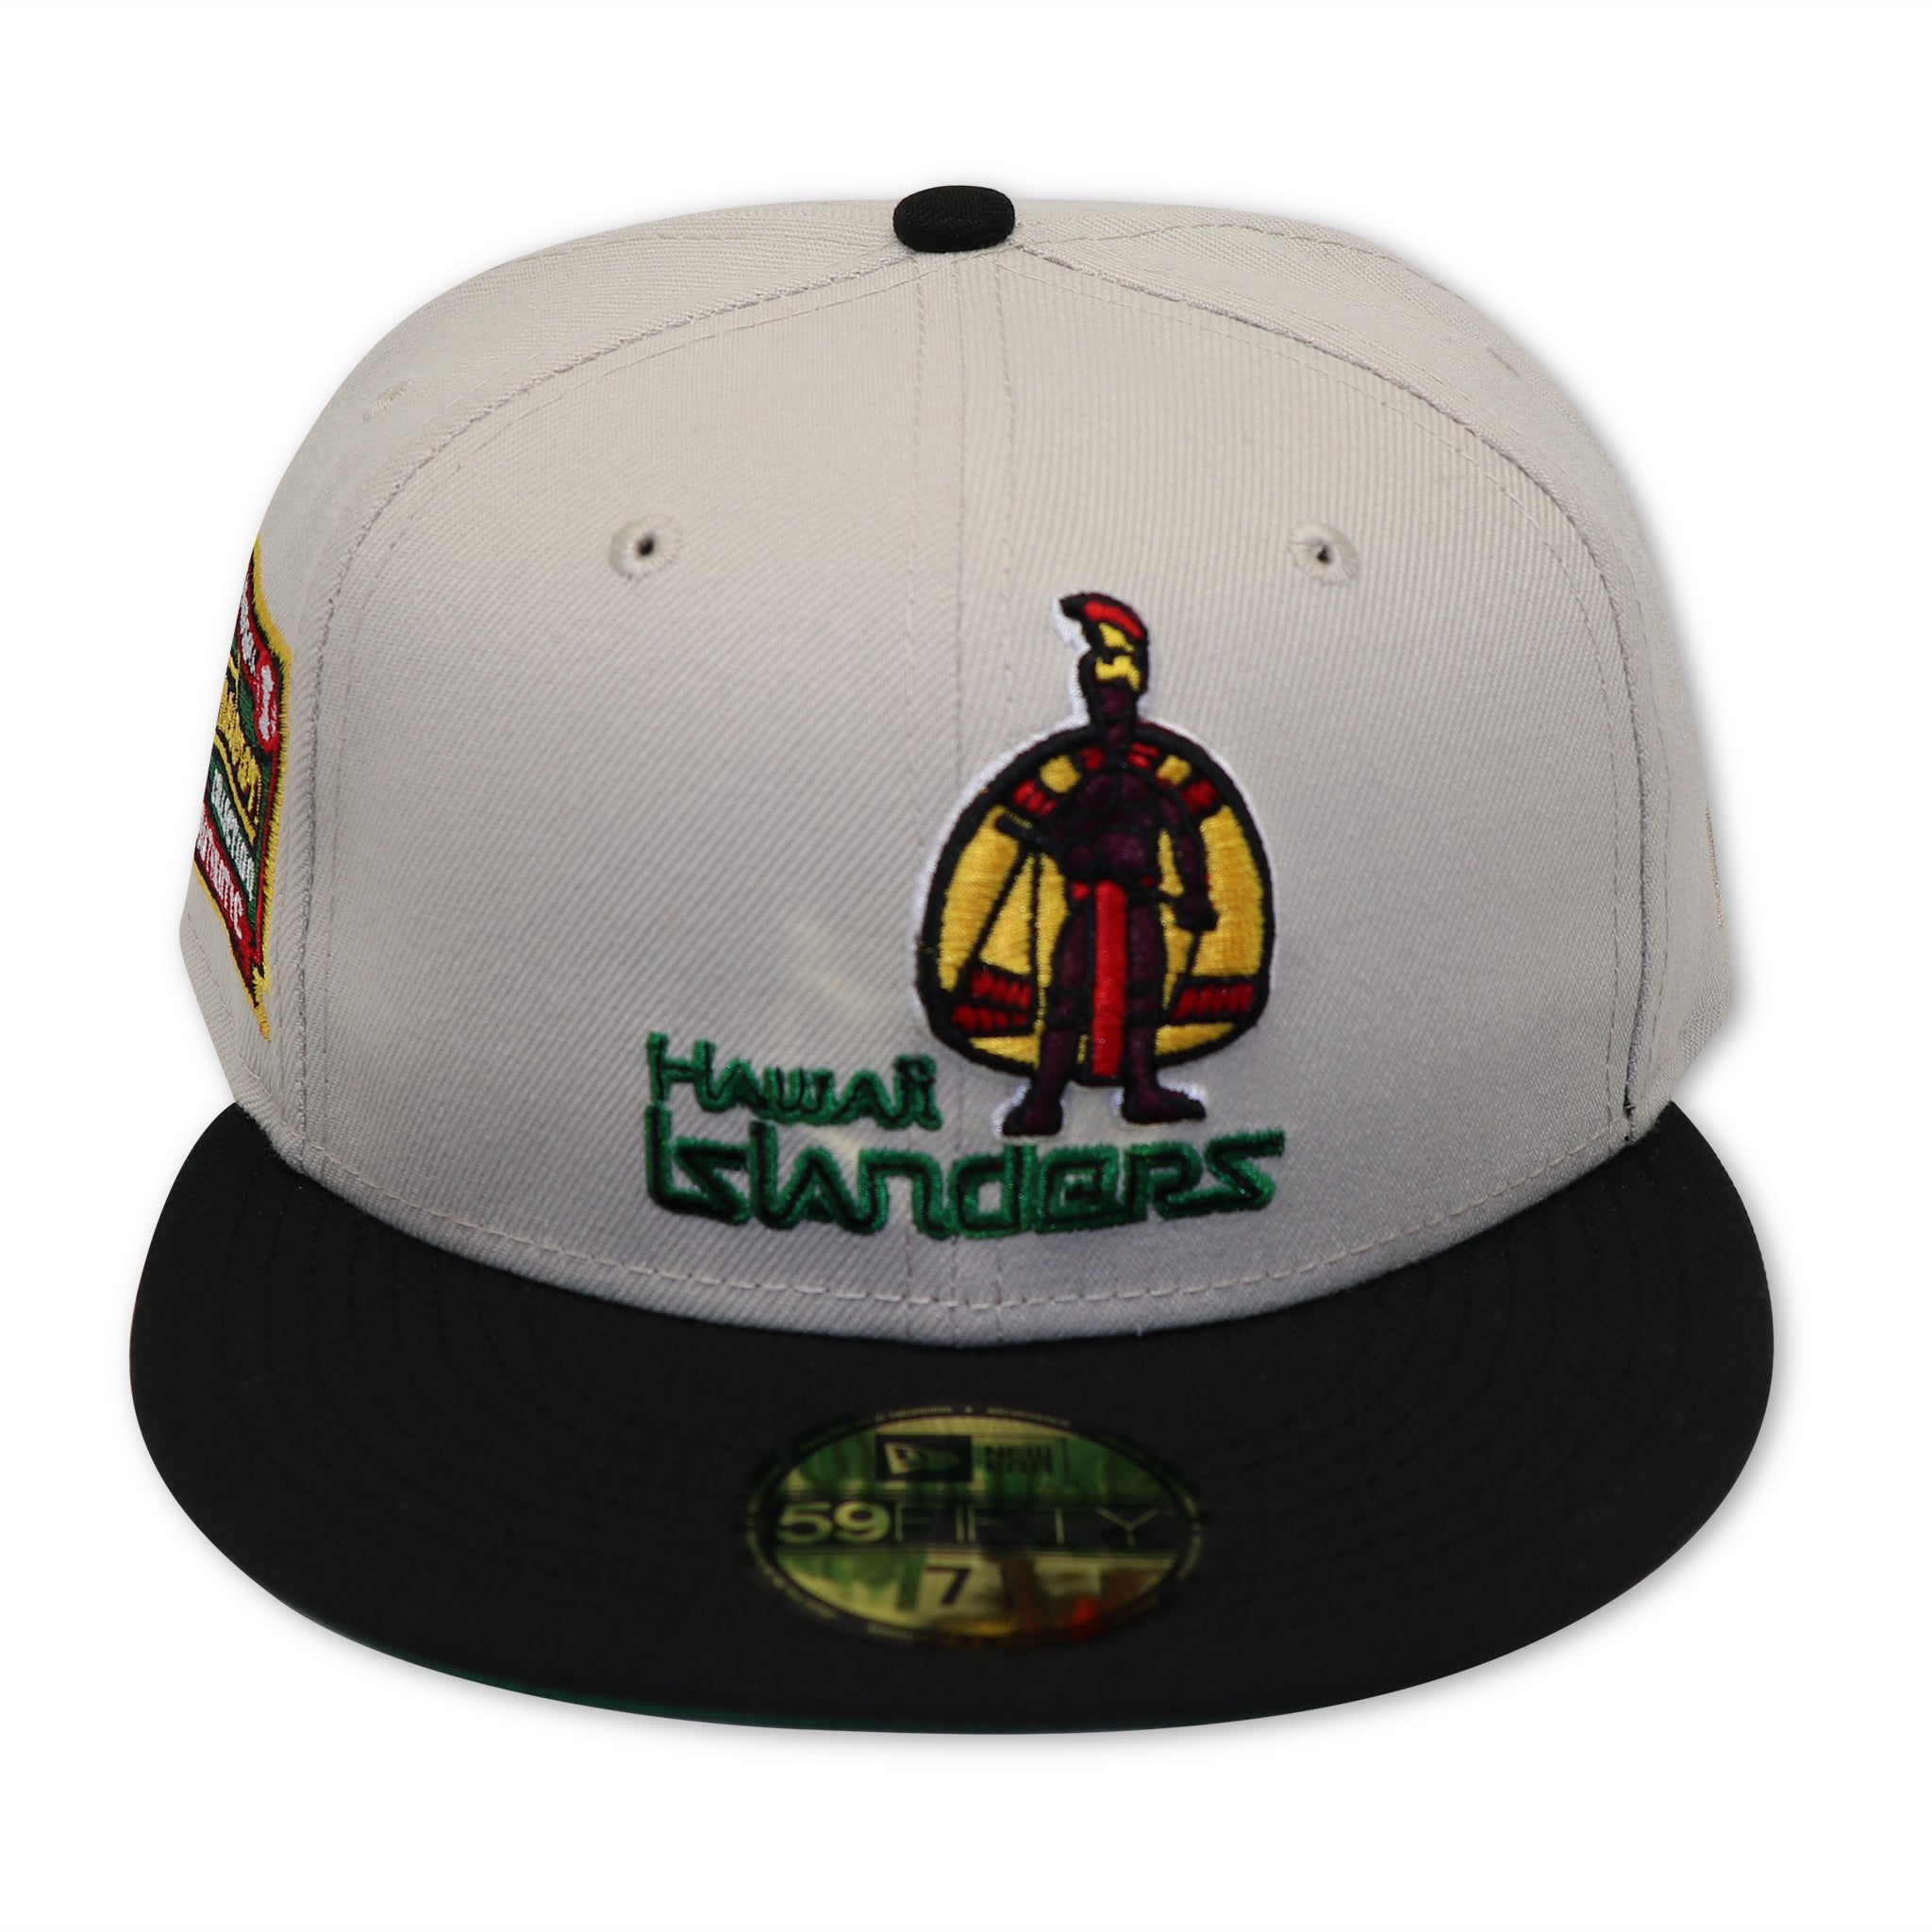 Hawaii Islanders Hometown Collection New Era 59FIFTY Red/Yellow Fitted Cap Yellow / 7 1/8